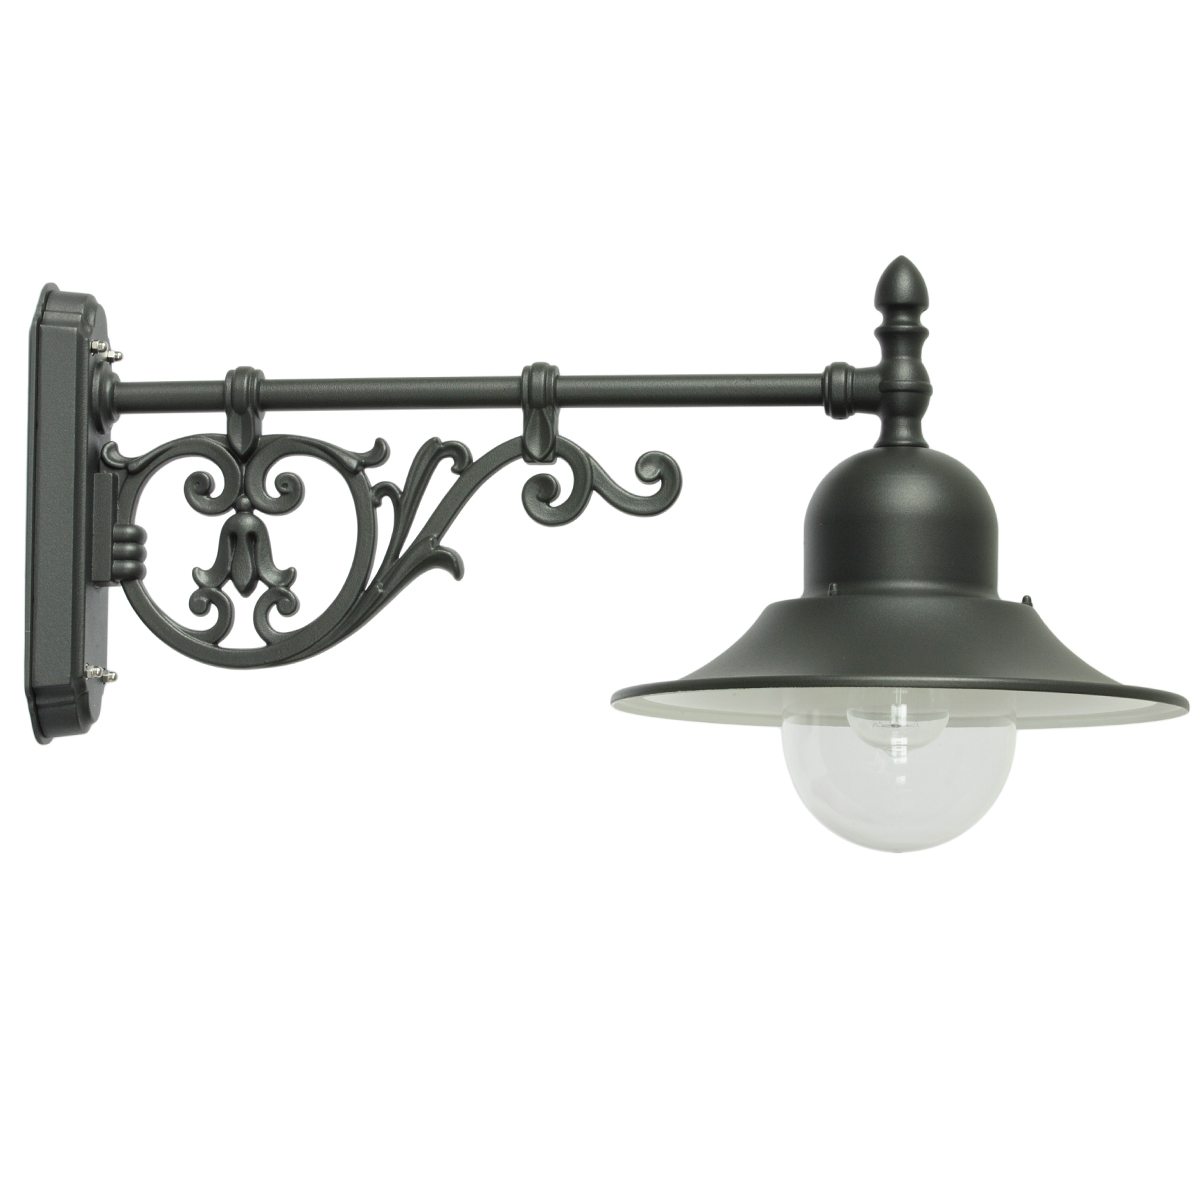 Italian Outdoor Wall Lamp with Historical Bracket